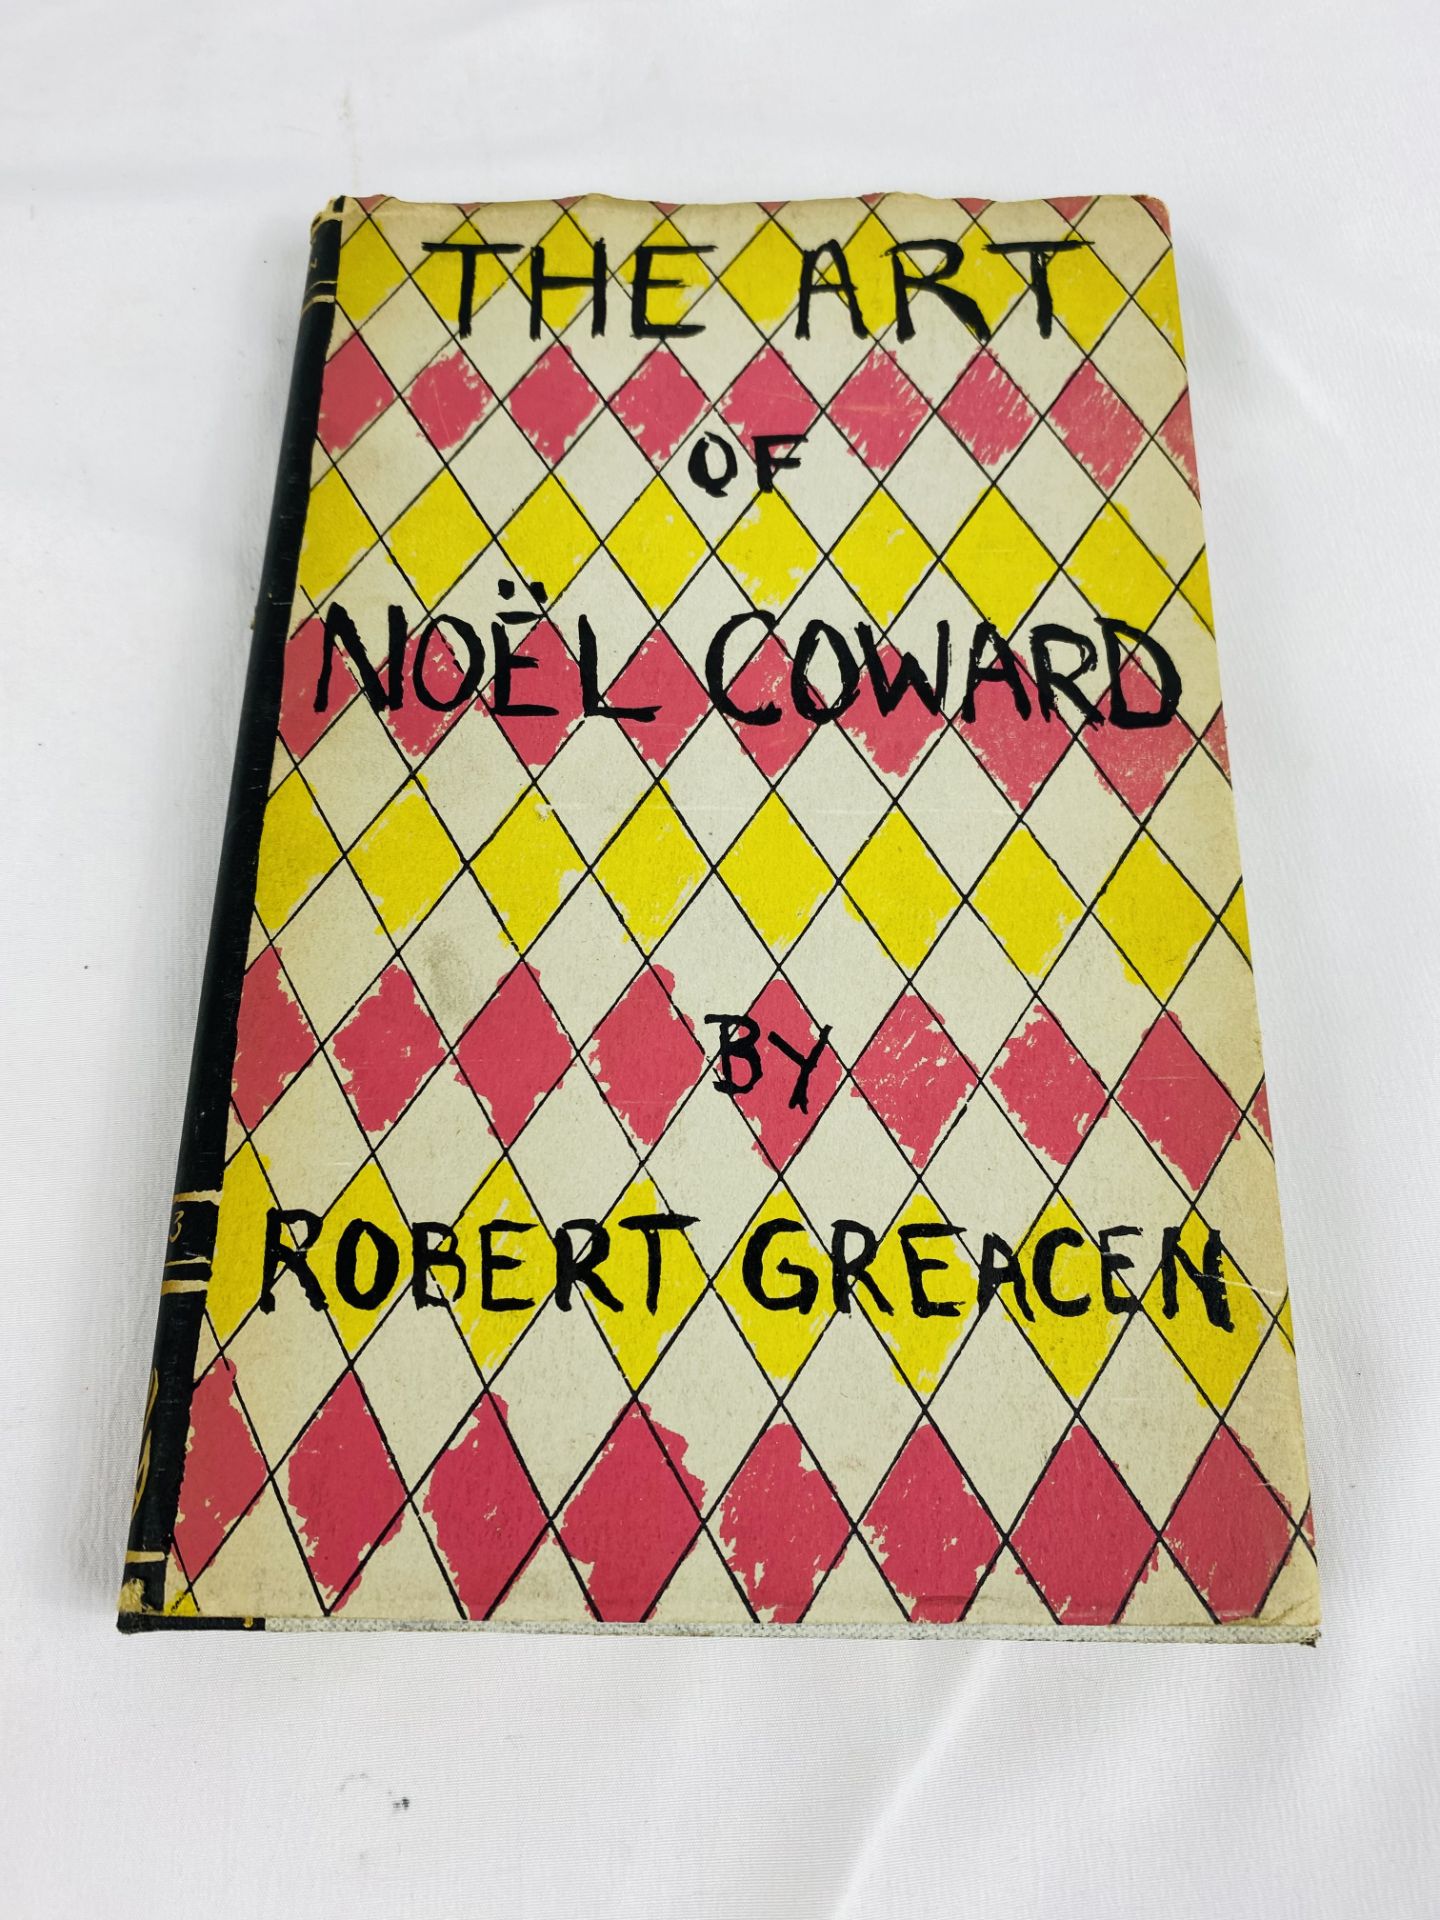 Noel Coward, Quadrille, together with two copies of The Art of Noel Coward by Robert Greacen - Image 5 of 7